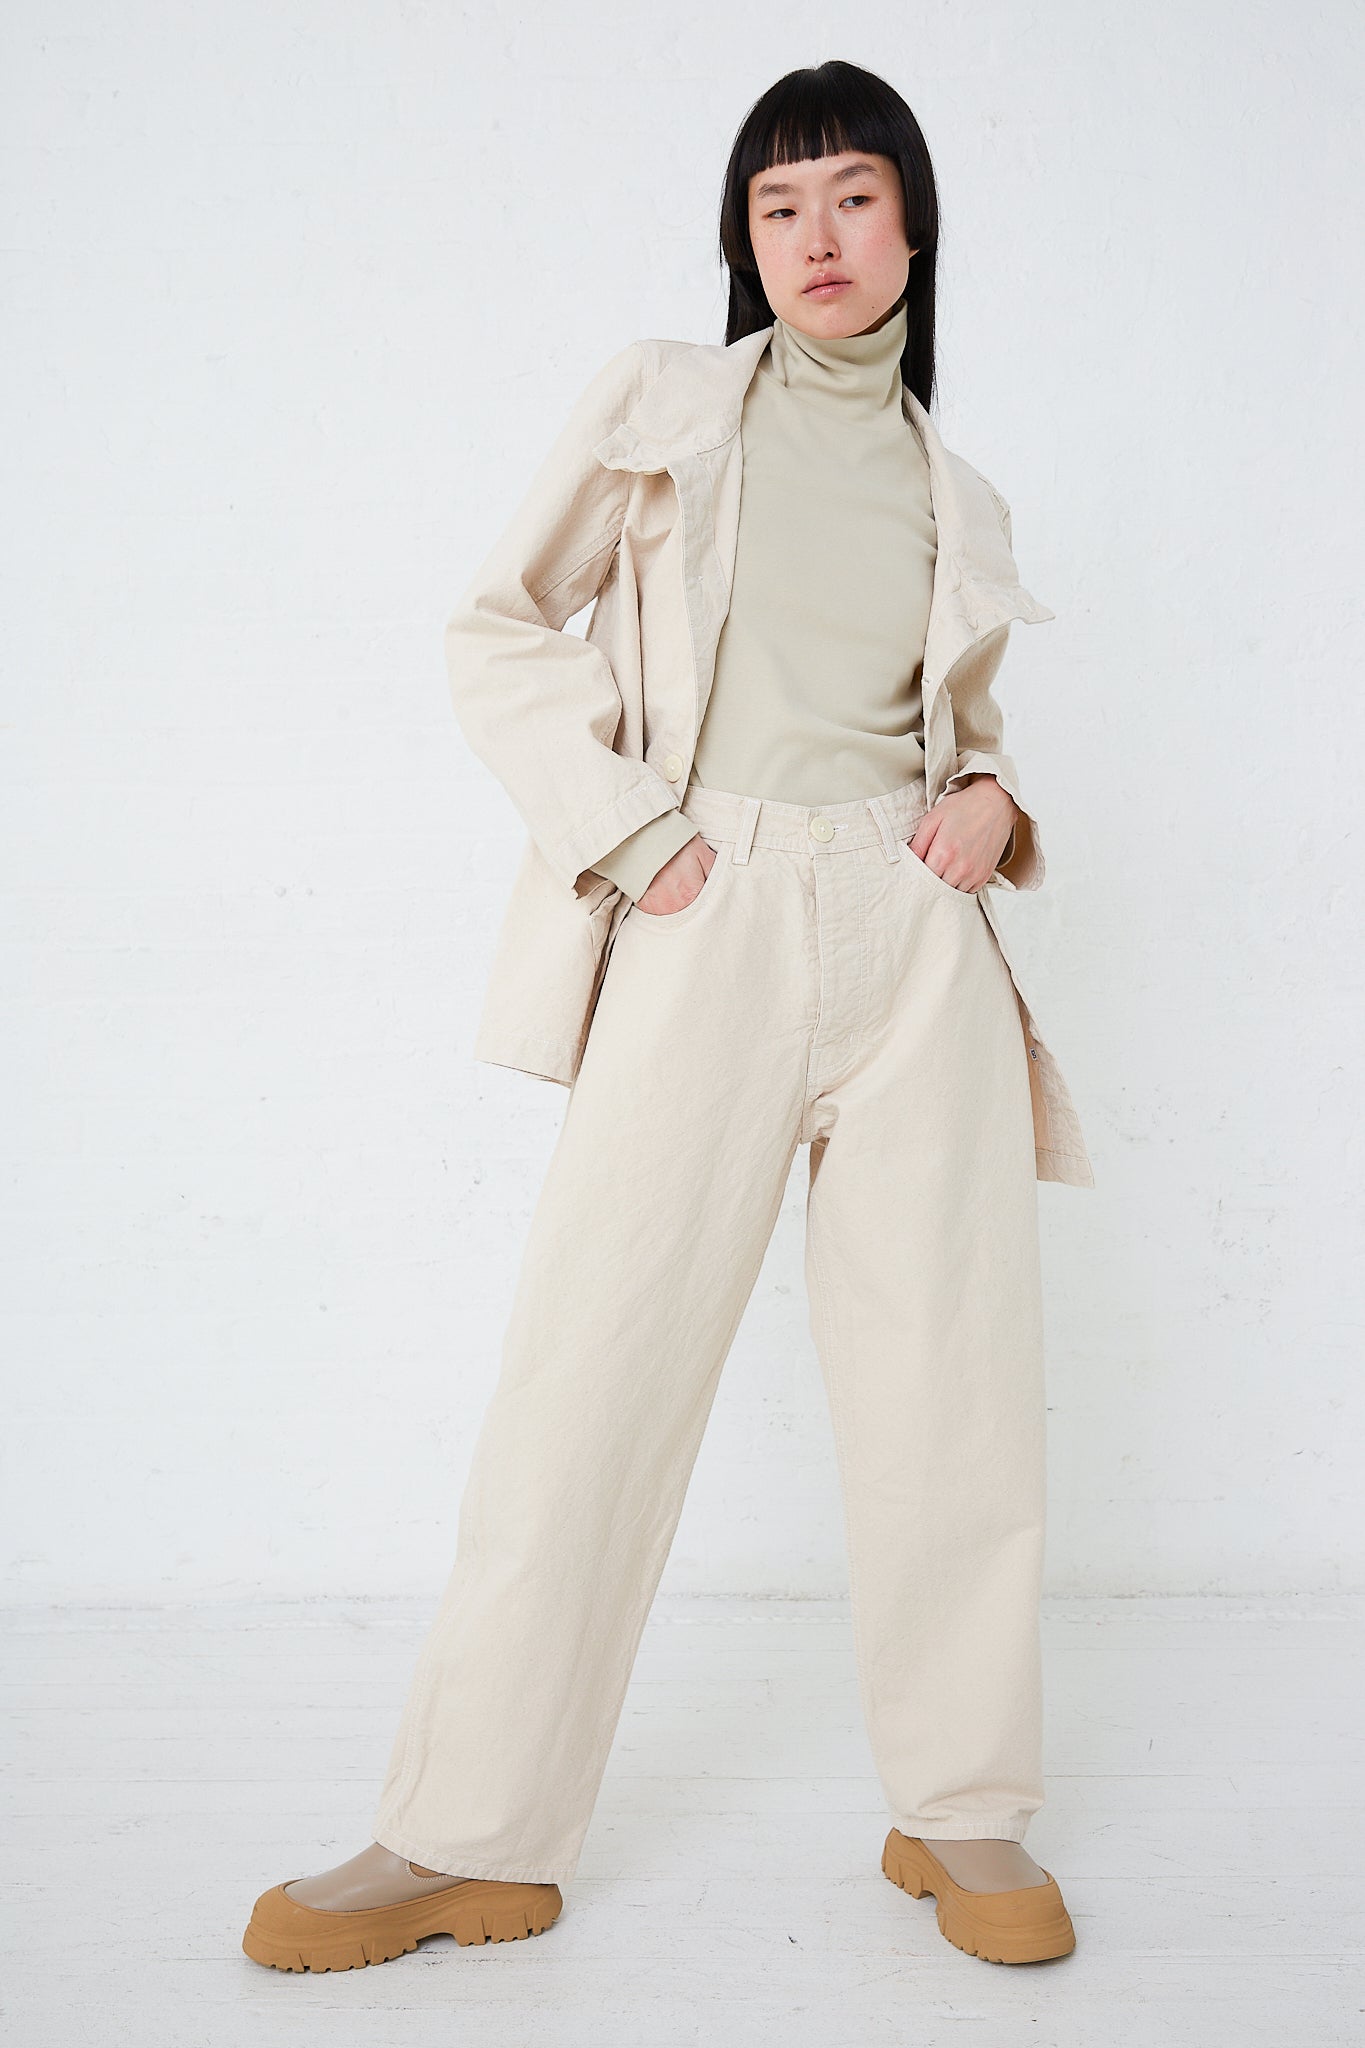 A woman in Jesse Kamm's Organic Canvas California Wide pants in Natural, paired with a turtle neck top.